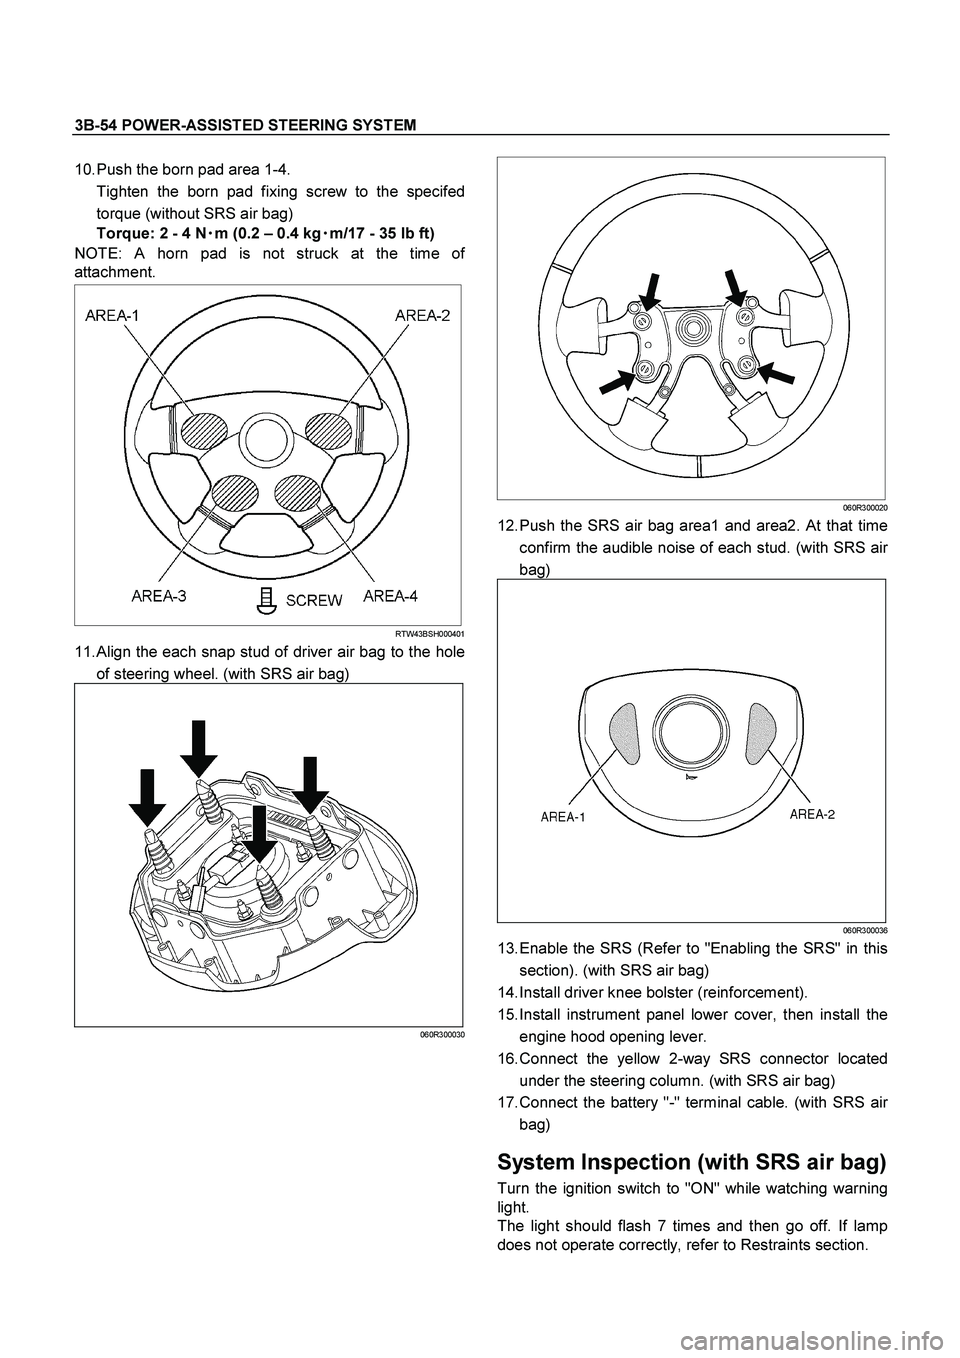 ISUZU TF SERIES 2004 Repair Manual 3B-54 POWER-ASSISTED STEERING SYSTEM
 
10. Push the born pad area 1-4. 
  Tighten the born pad fixing screw to the specifed
torque (without SRS air bag) 
Torque: 2 - 4 N
 m (0.2 – 0.4 kg
 m/